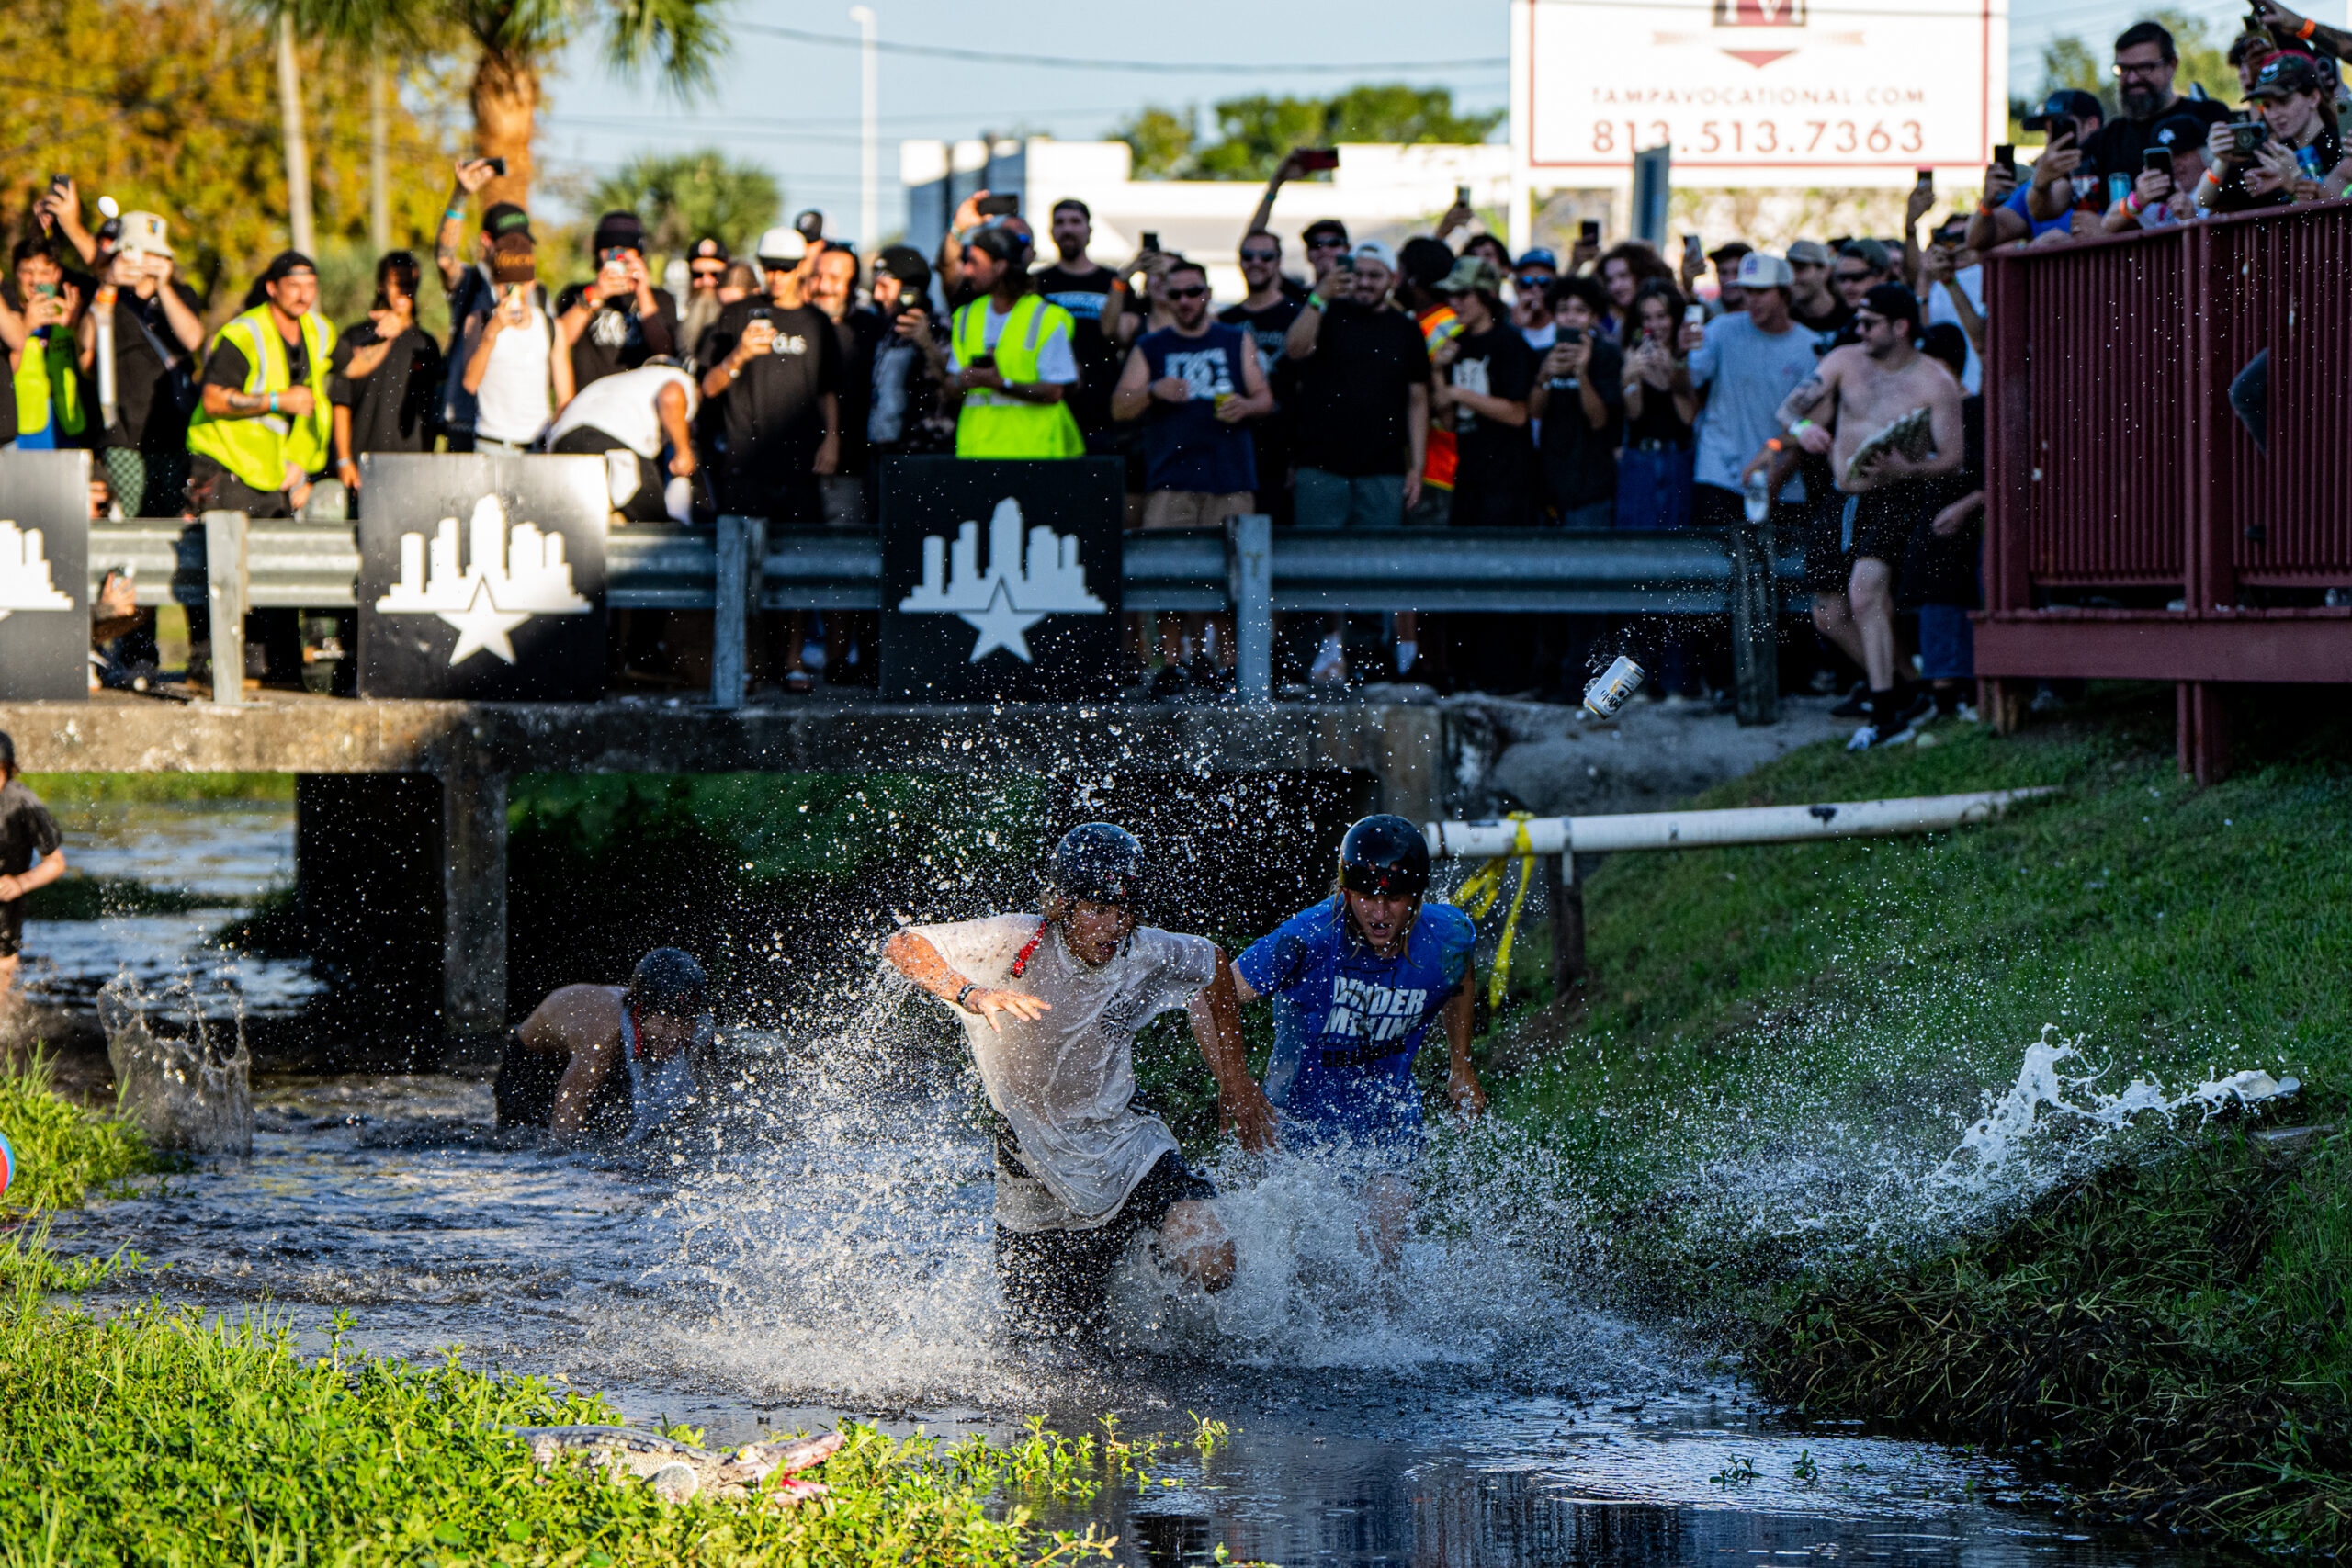 Moat Race during Tampa AM 2023 at Skatepark of Tampa